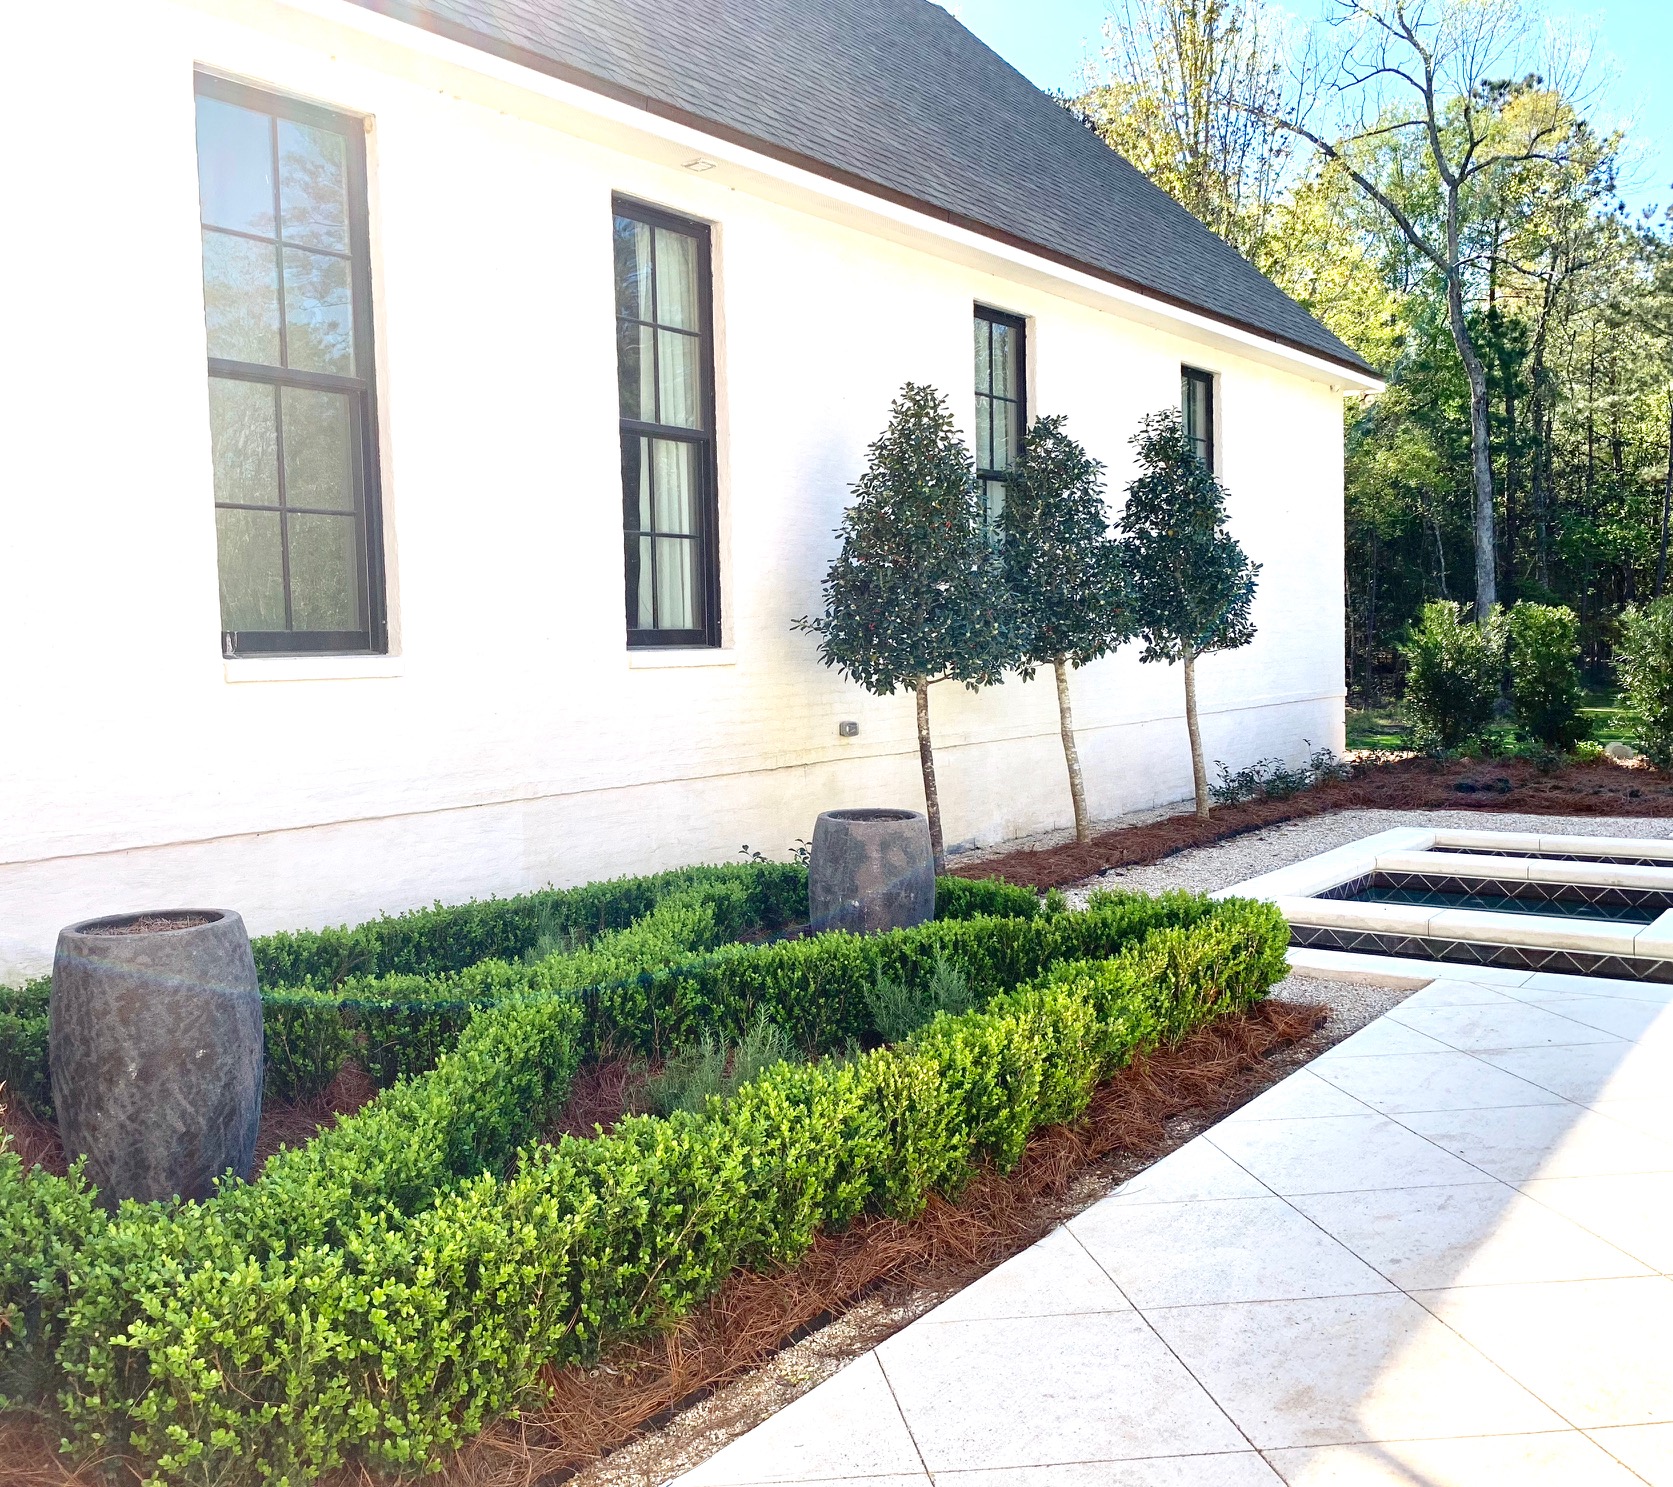   Landscape Design &amp; Installation   One Step Closer to the Yard of Your Dreams   Get a Free Estimate  